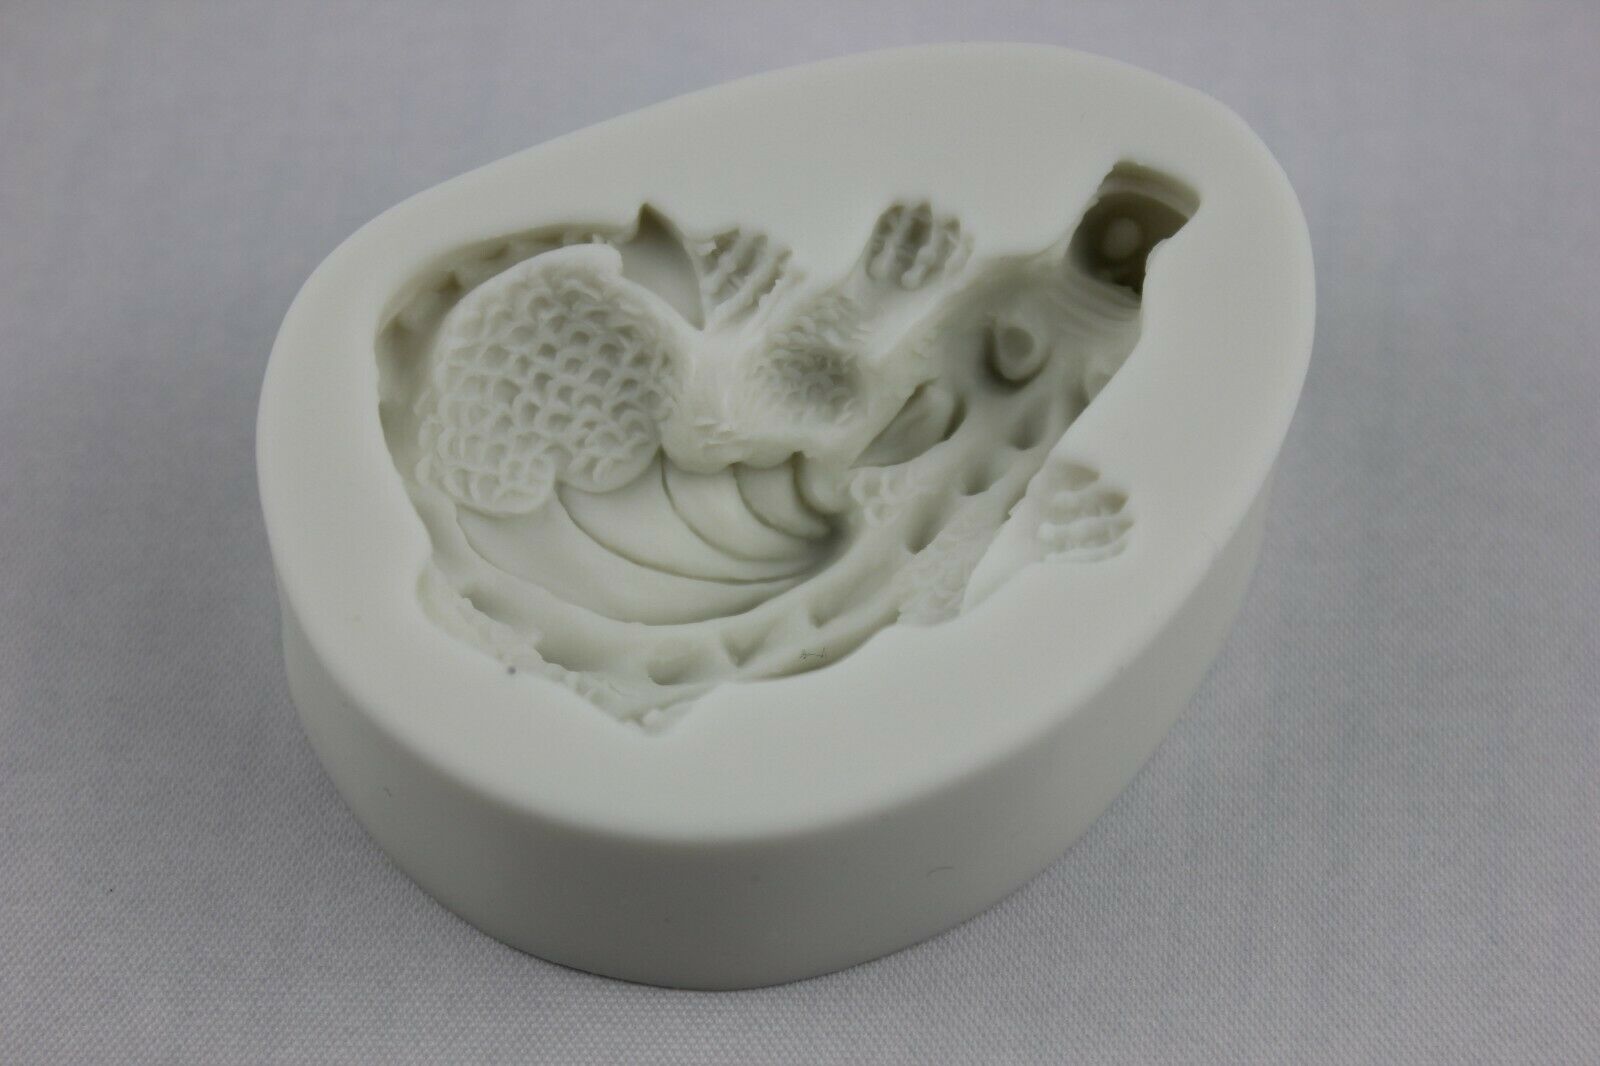 attachment-https://www.cupcakeaddicts.co.uk/wp-content/uploads/imported/2/Crouching-Dragon-Silicone-Mould-Resin-Icing-Fondant-Ice-Soap-Sugar-Craft-Melt-324684428982-4.jpg